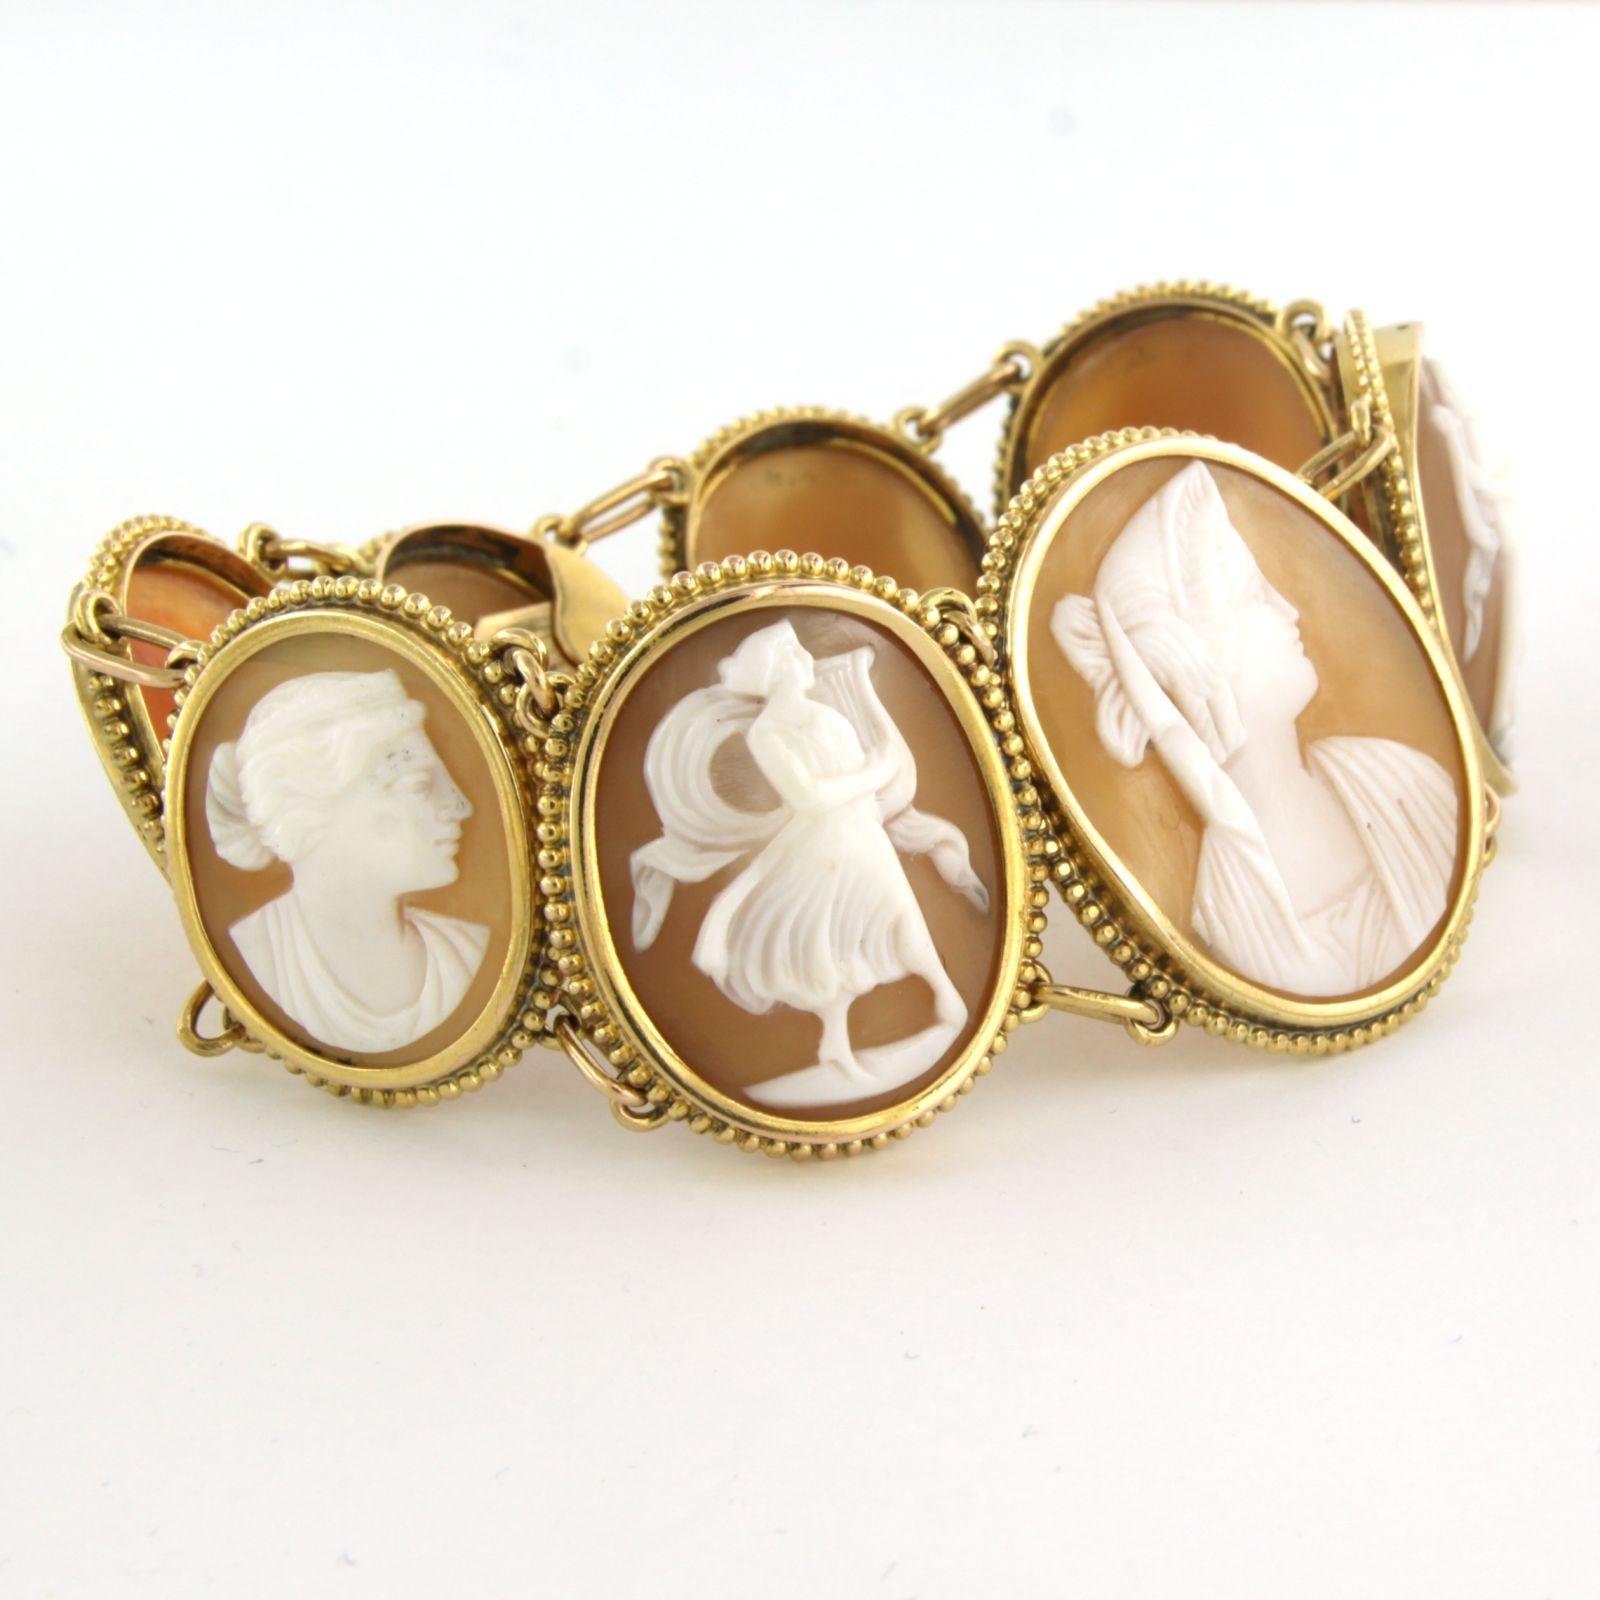 Bracelet with ladies portrait camee In Good Condition For Sale In The Hague, ZH